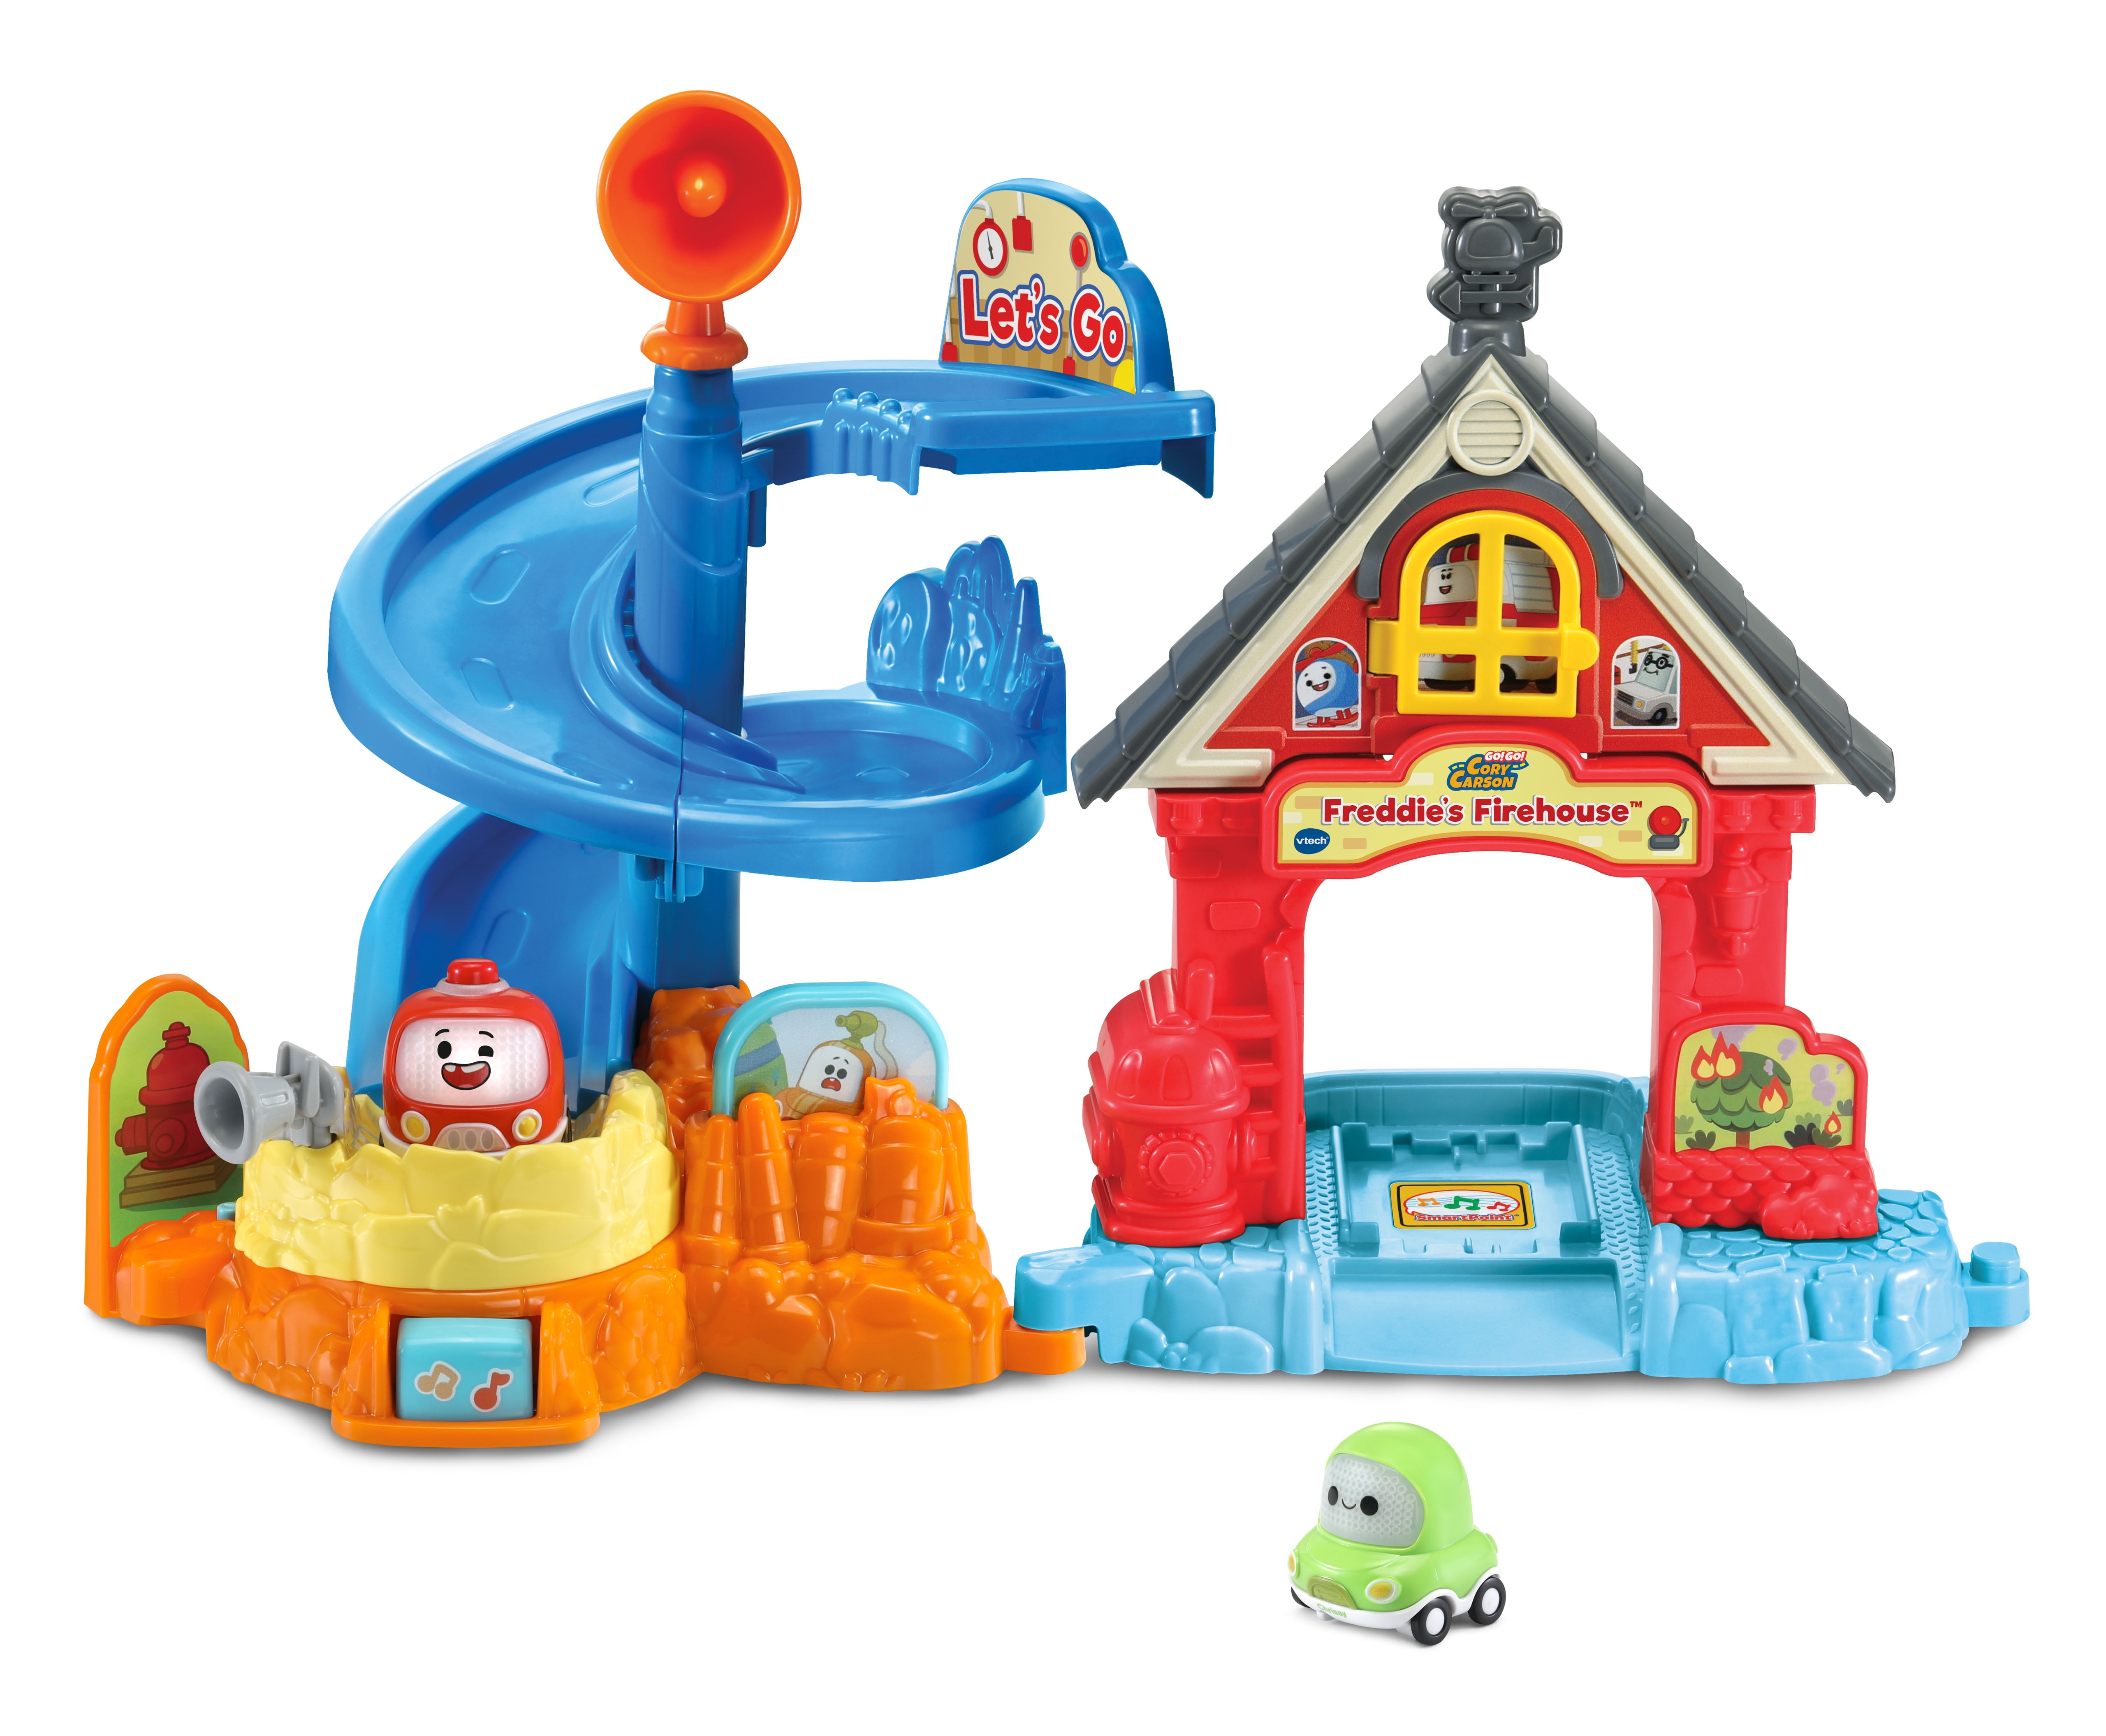 Details about   Go Go Cory Carson & Chrissy Netflix Cars Interactive Vehicles Vtech Music Lights 